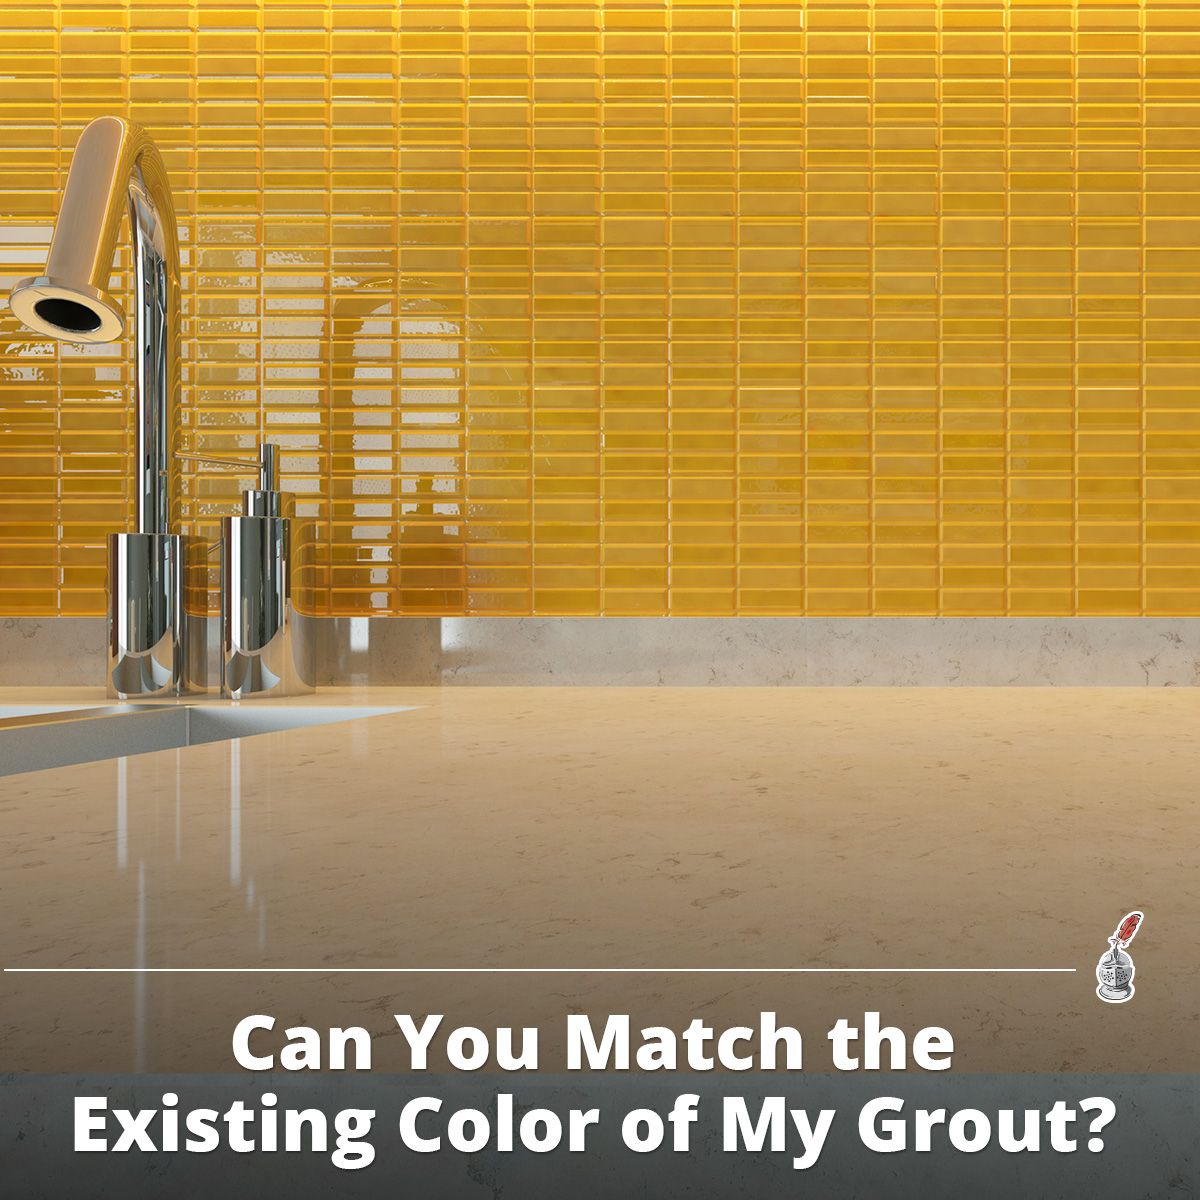 Can You Match the Existing Color of My Grout?